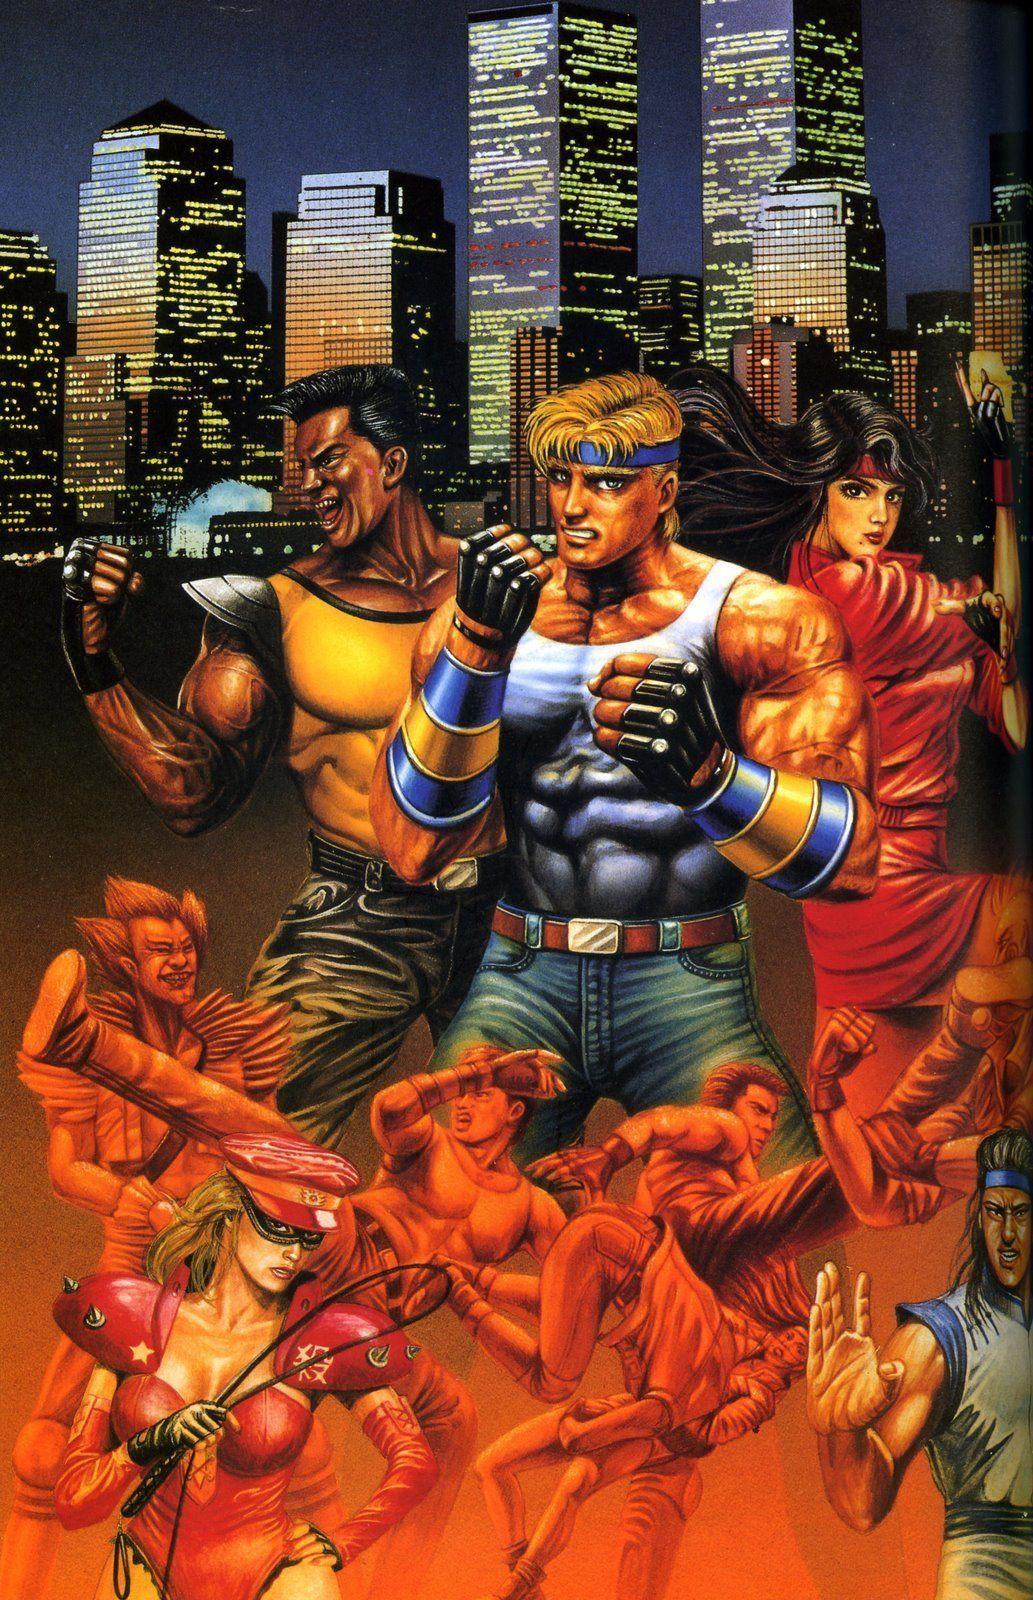 Streets of Rage image streets of rage HD wallpaper and background